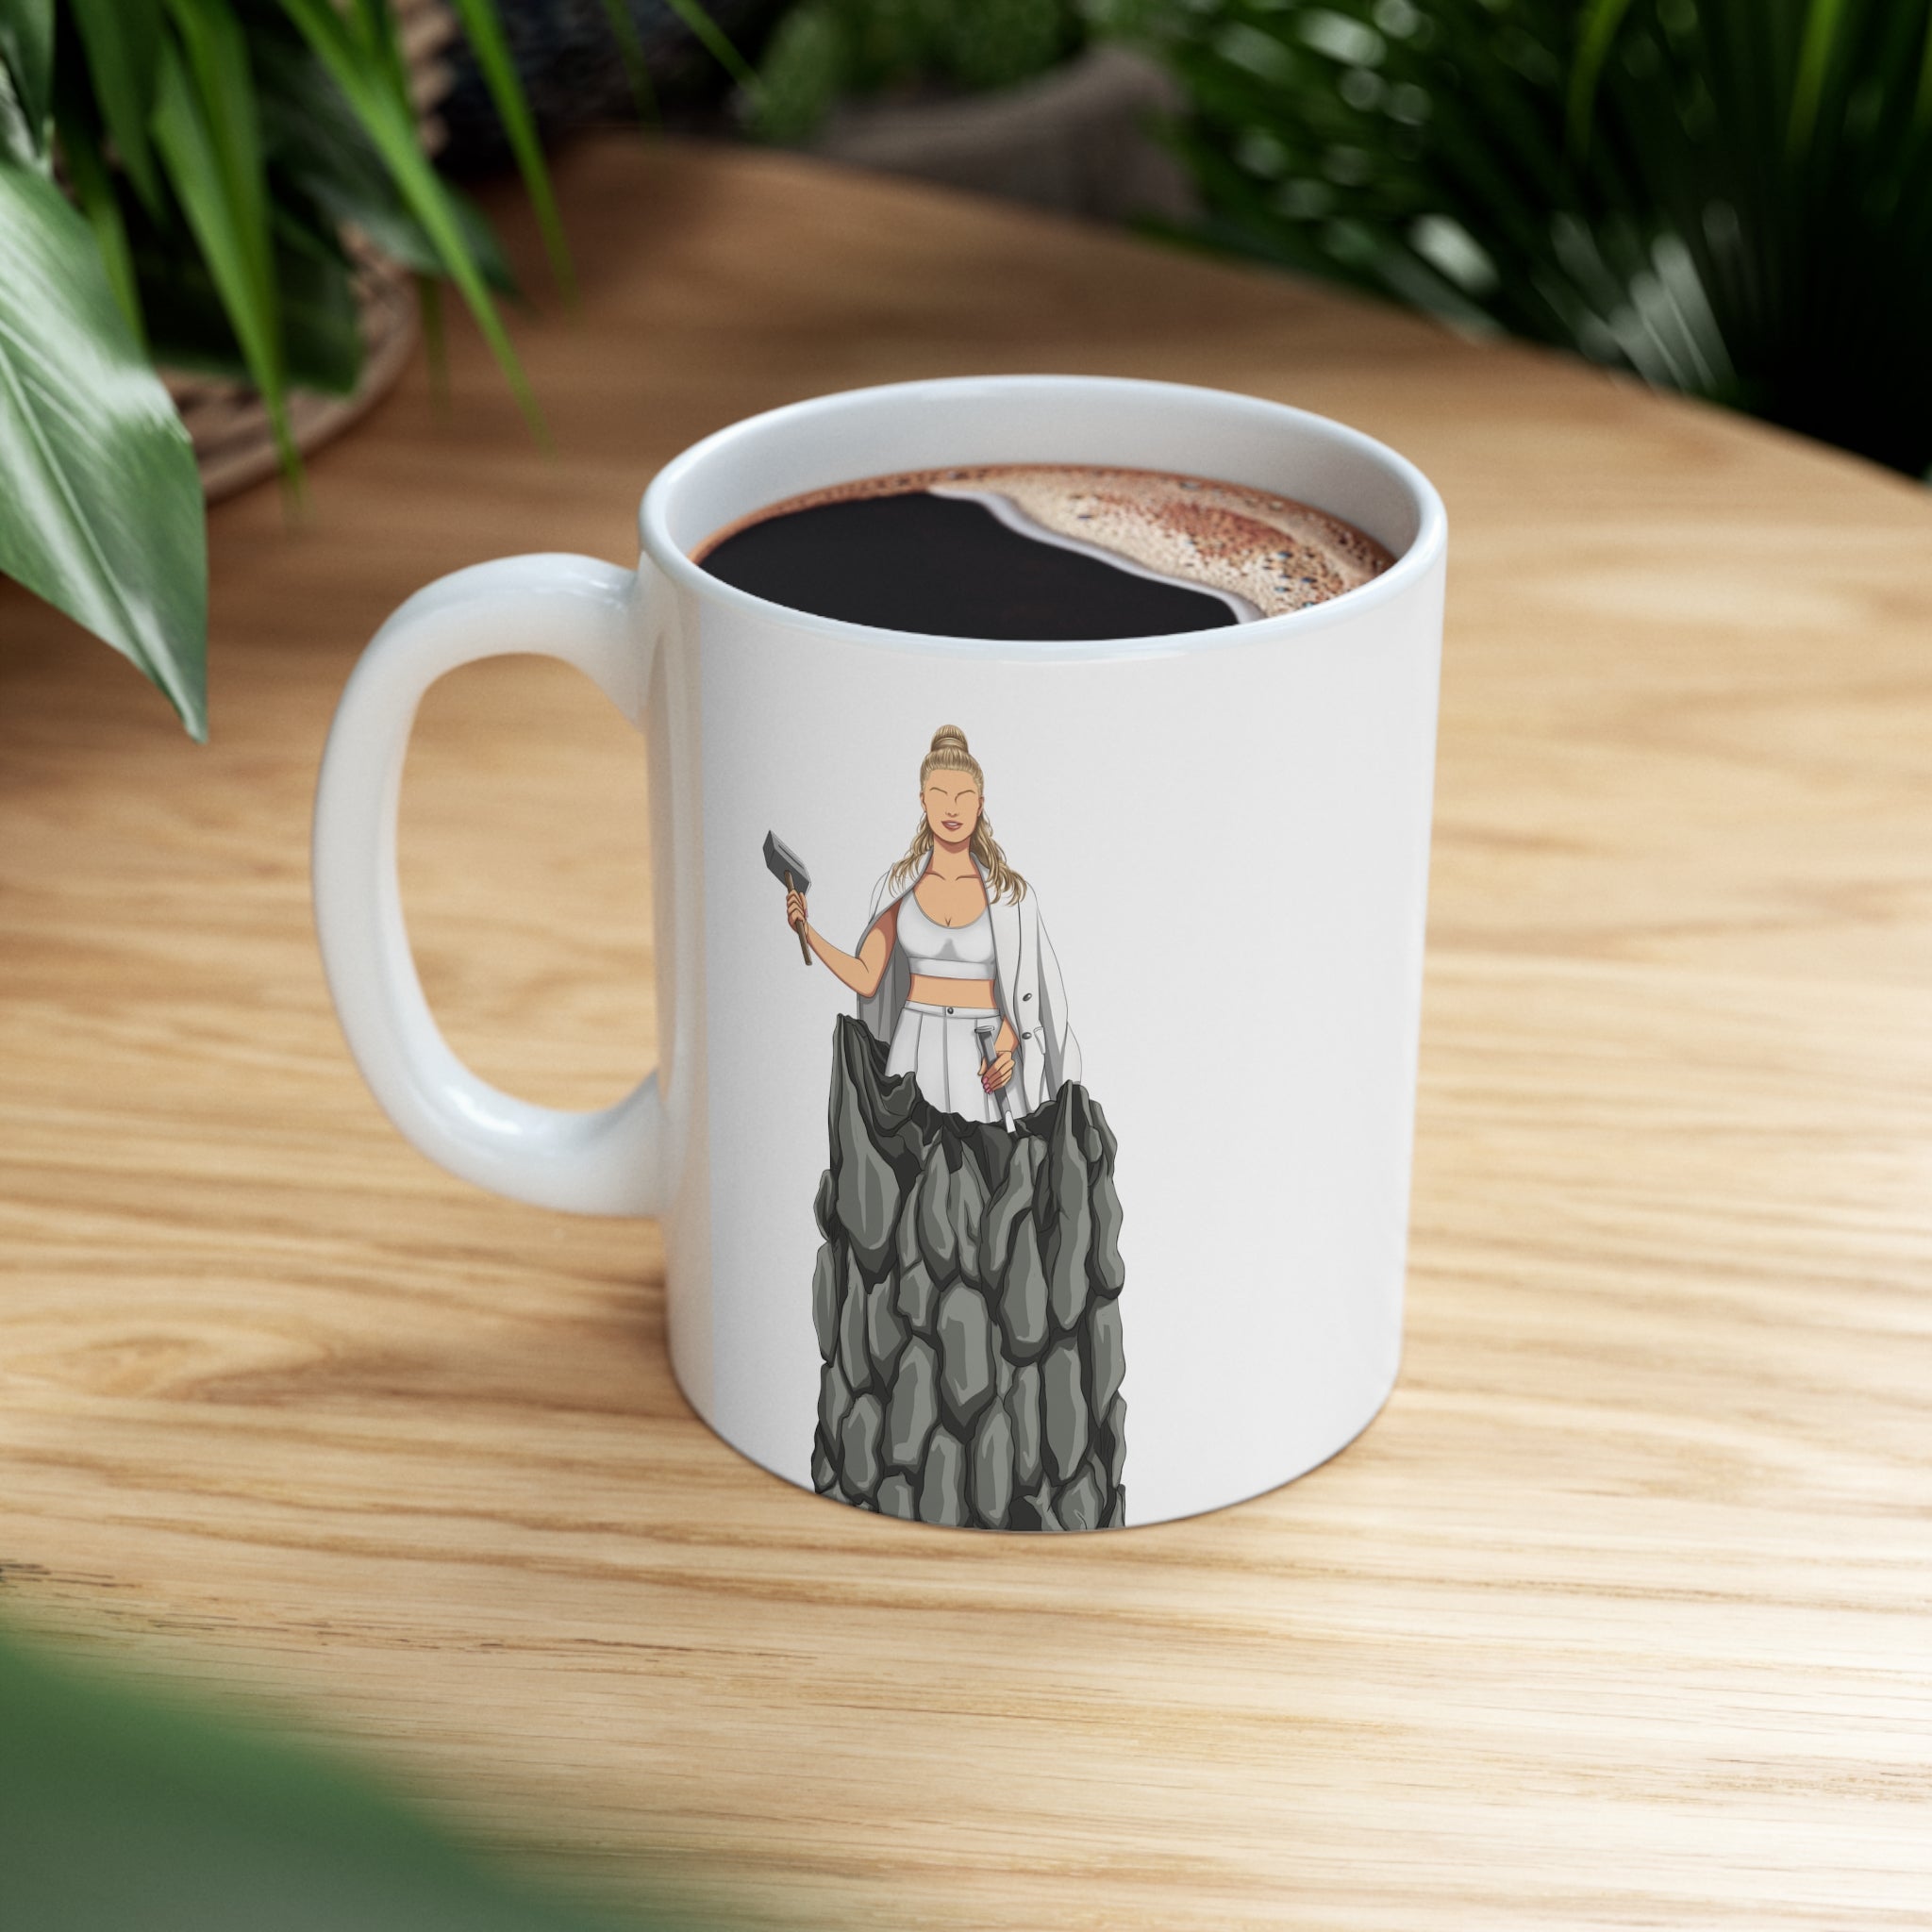 A person working hard to better his/herself - Ceramic Mug 11oz - Self-Made Woman #11 - Breakthrough Collection